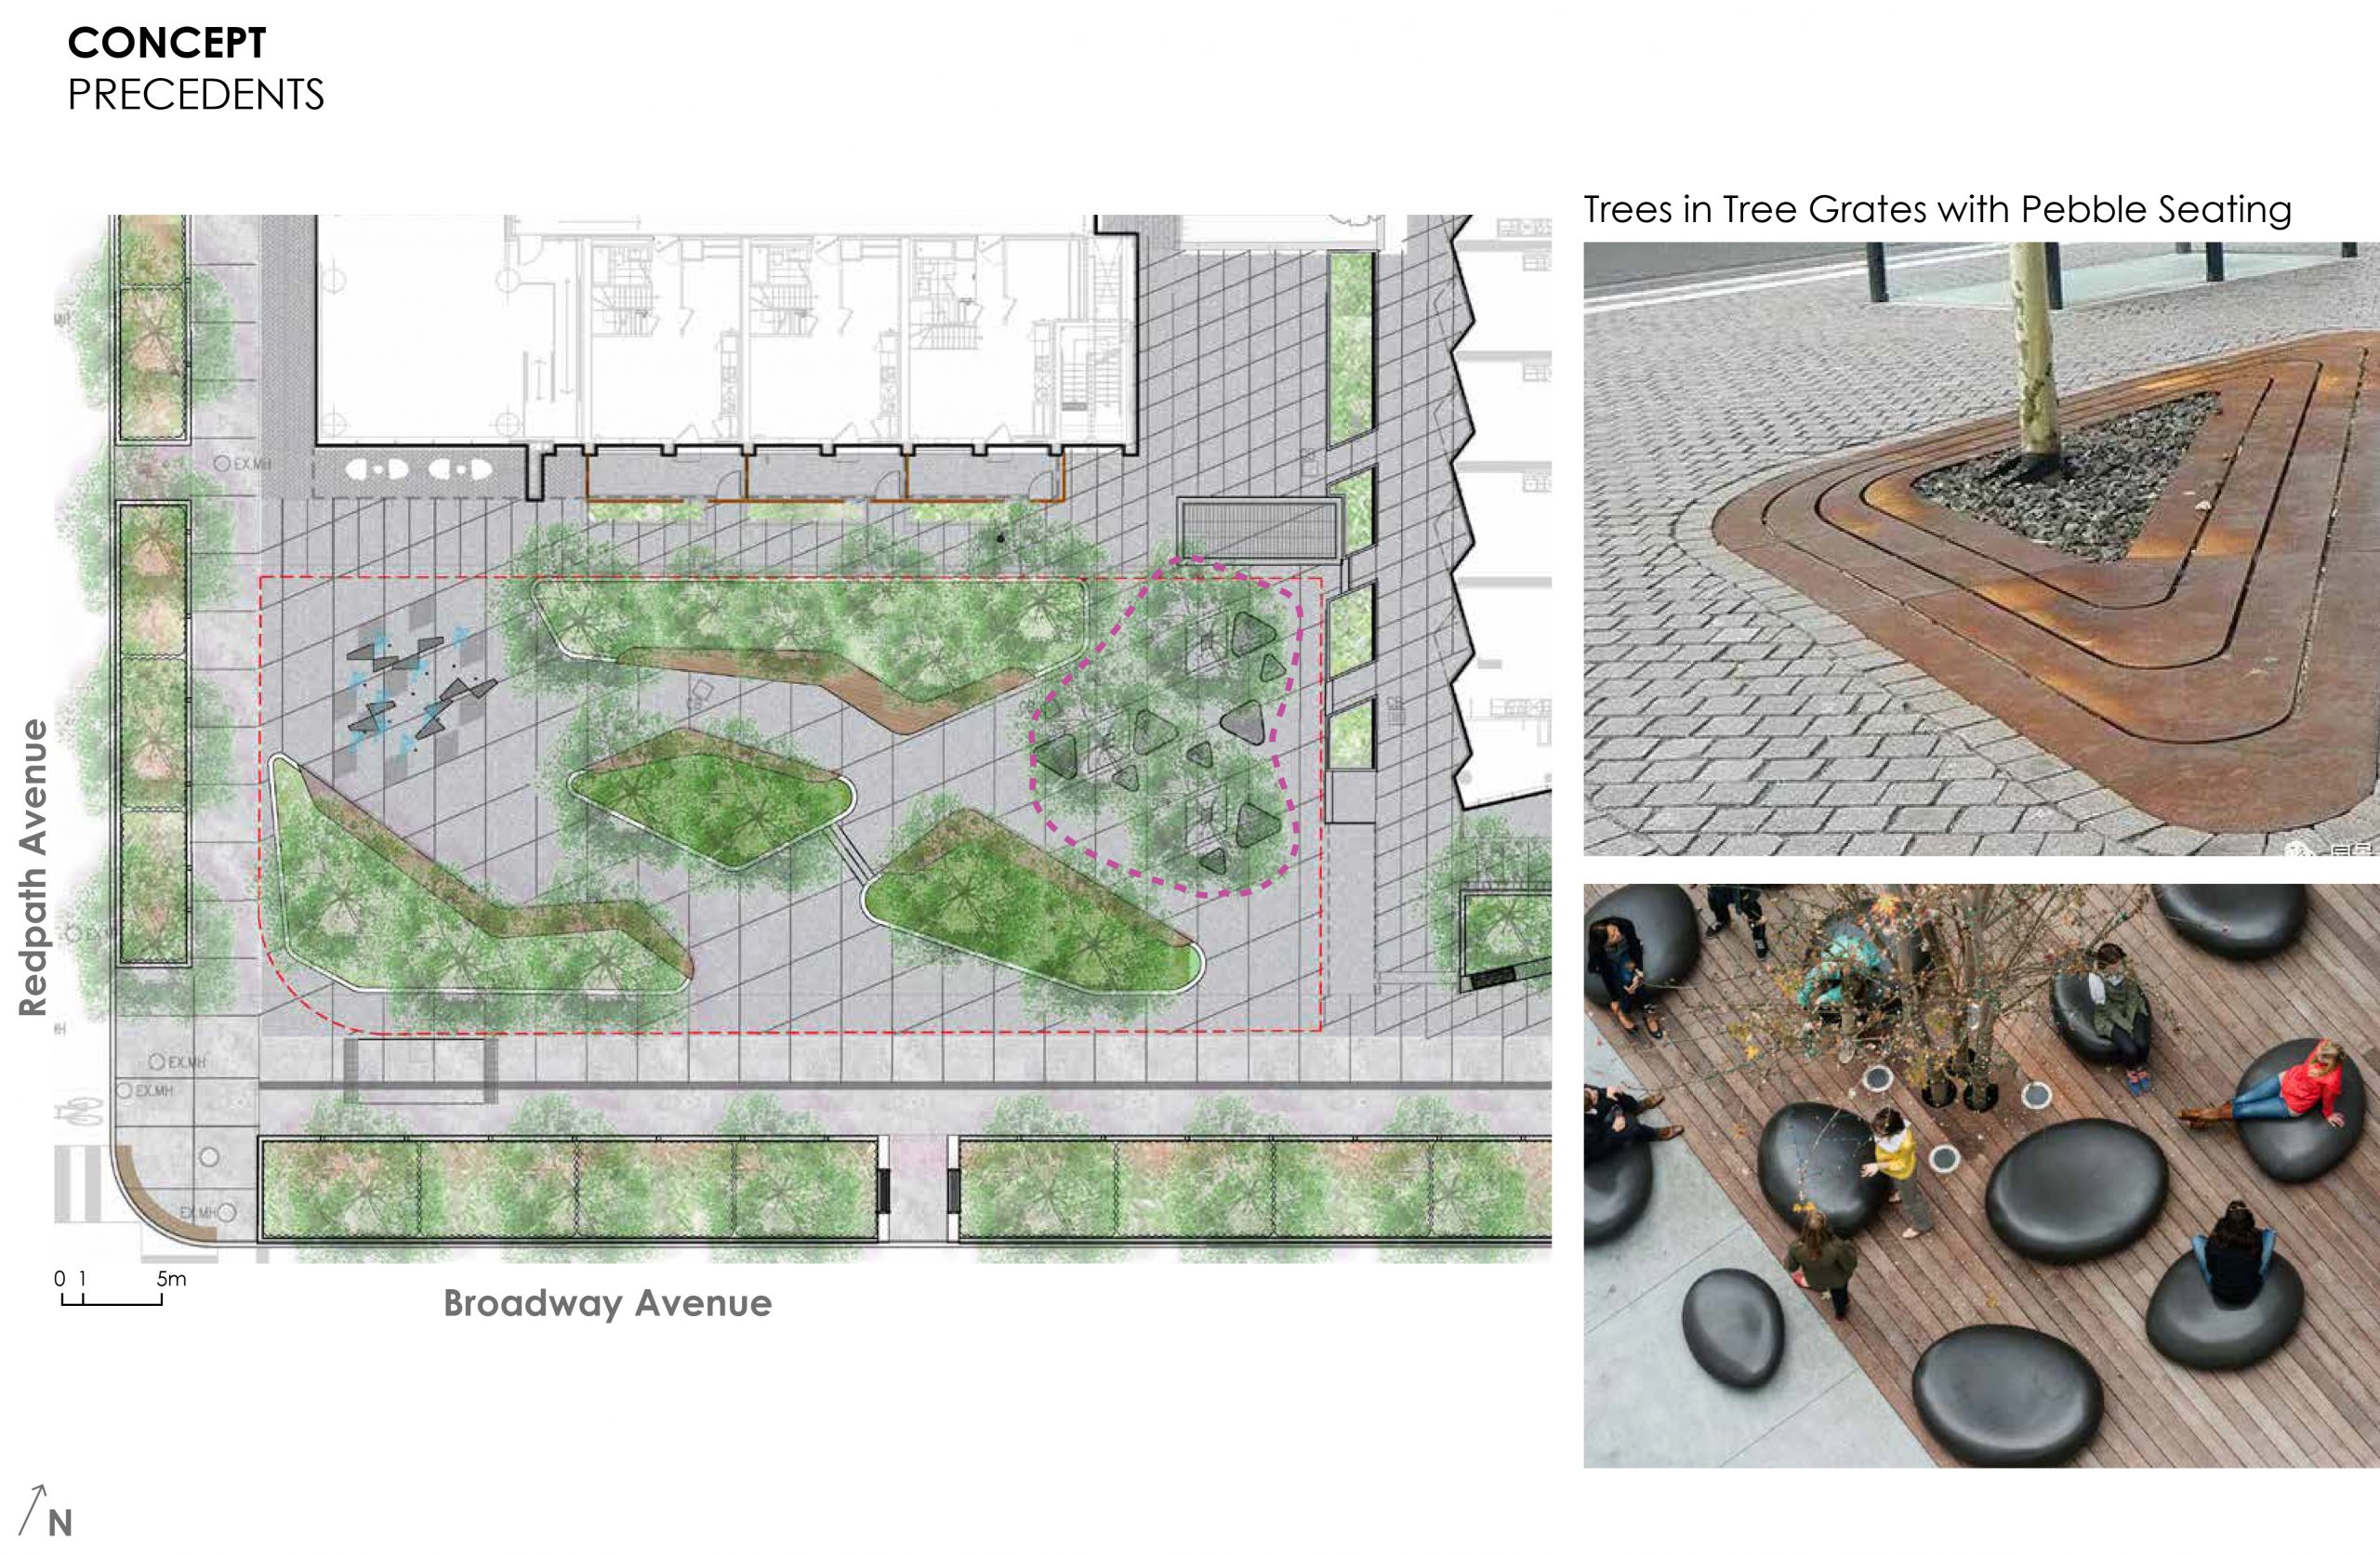 An image that provides some examples of the material treatments for tree grates and sculptural seating stones.